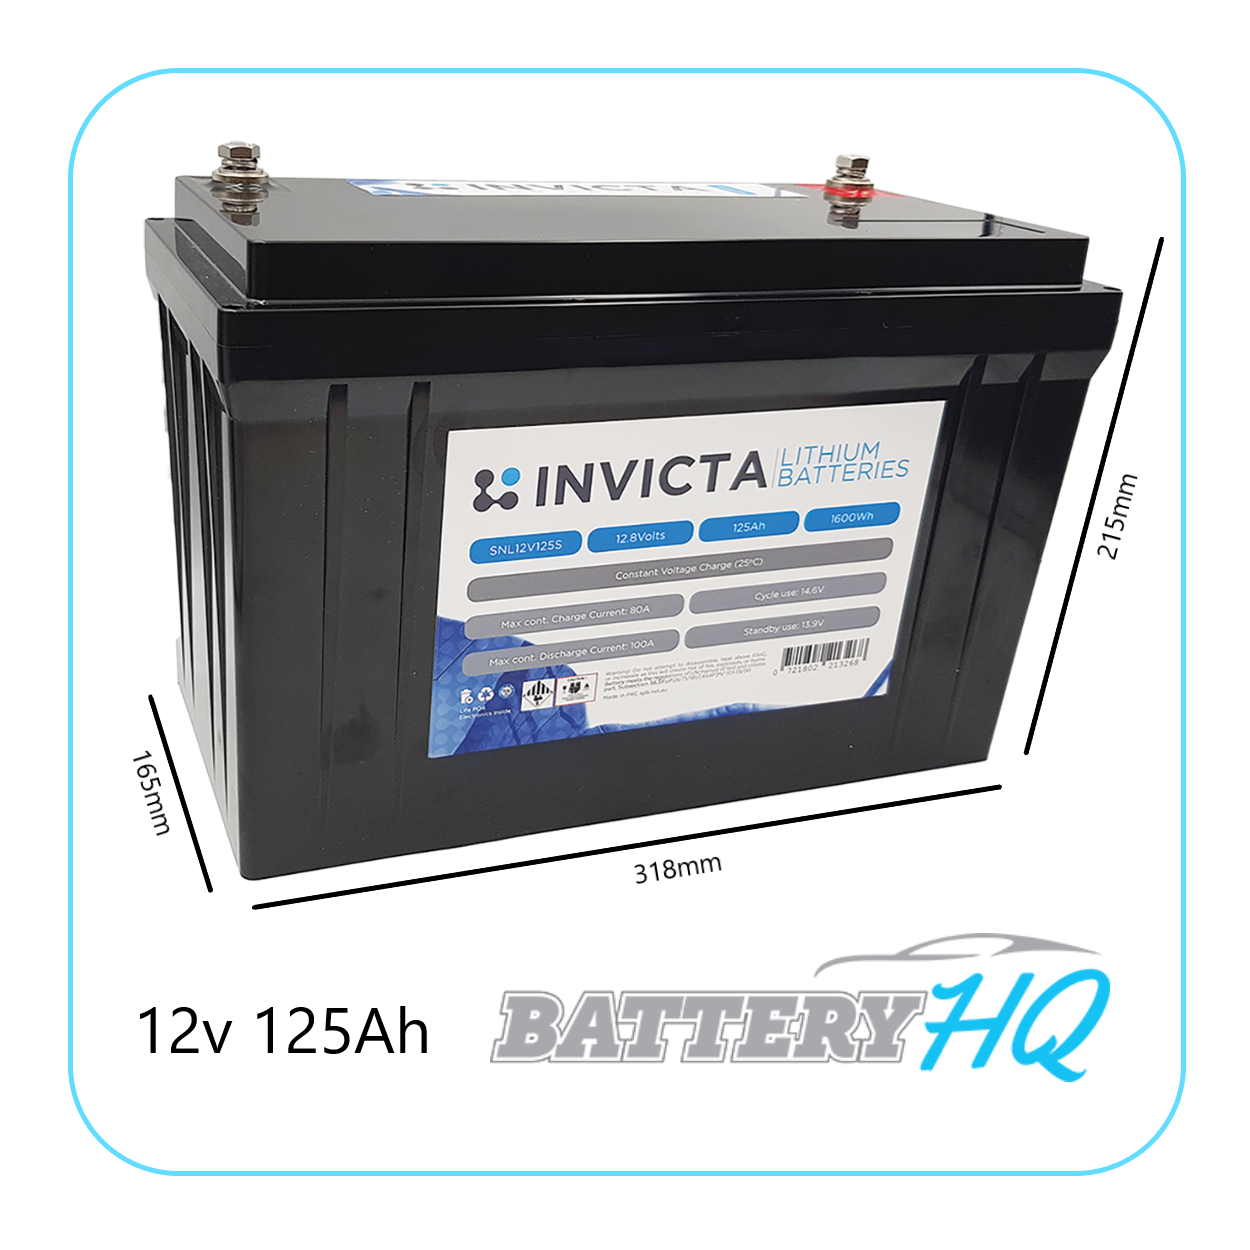 Invicta SNL12v125s Lithium Deep Cycle Battery - Battery HQ Brisbane